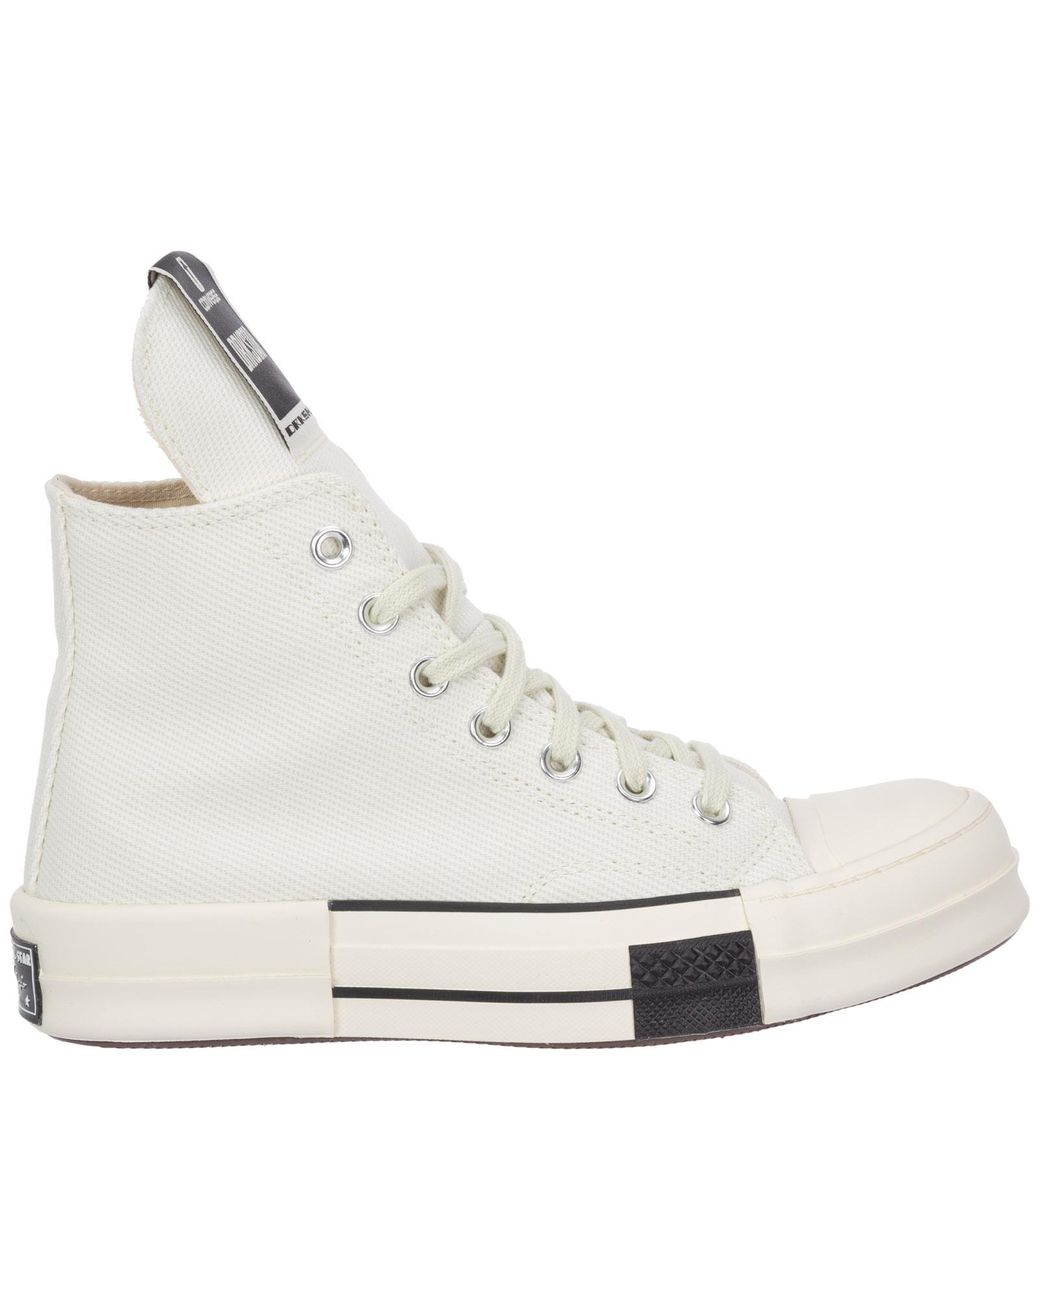 Rick Owens DRKSHDW Shoes High Top Trainers Sneakers Darkstar Converse X ...